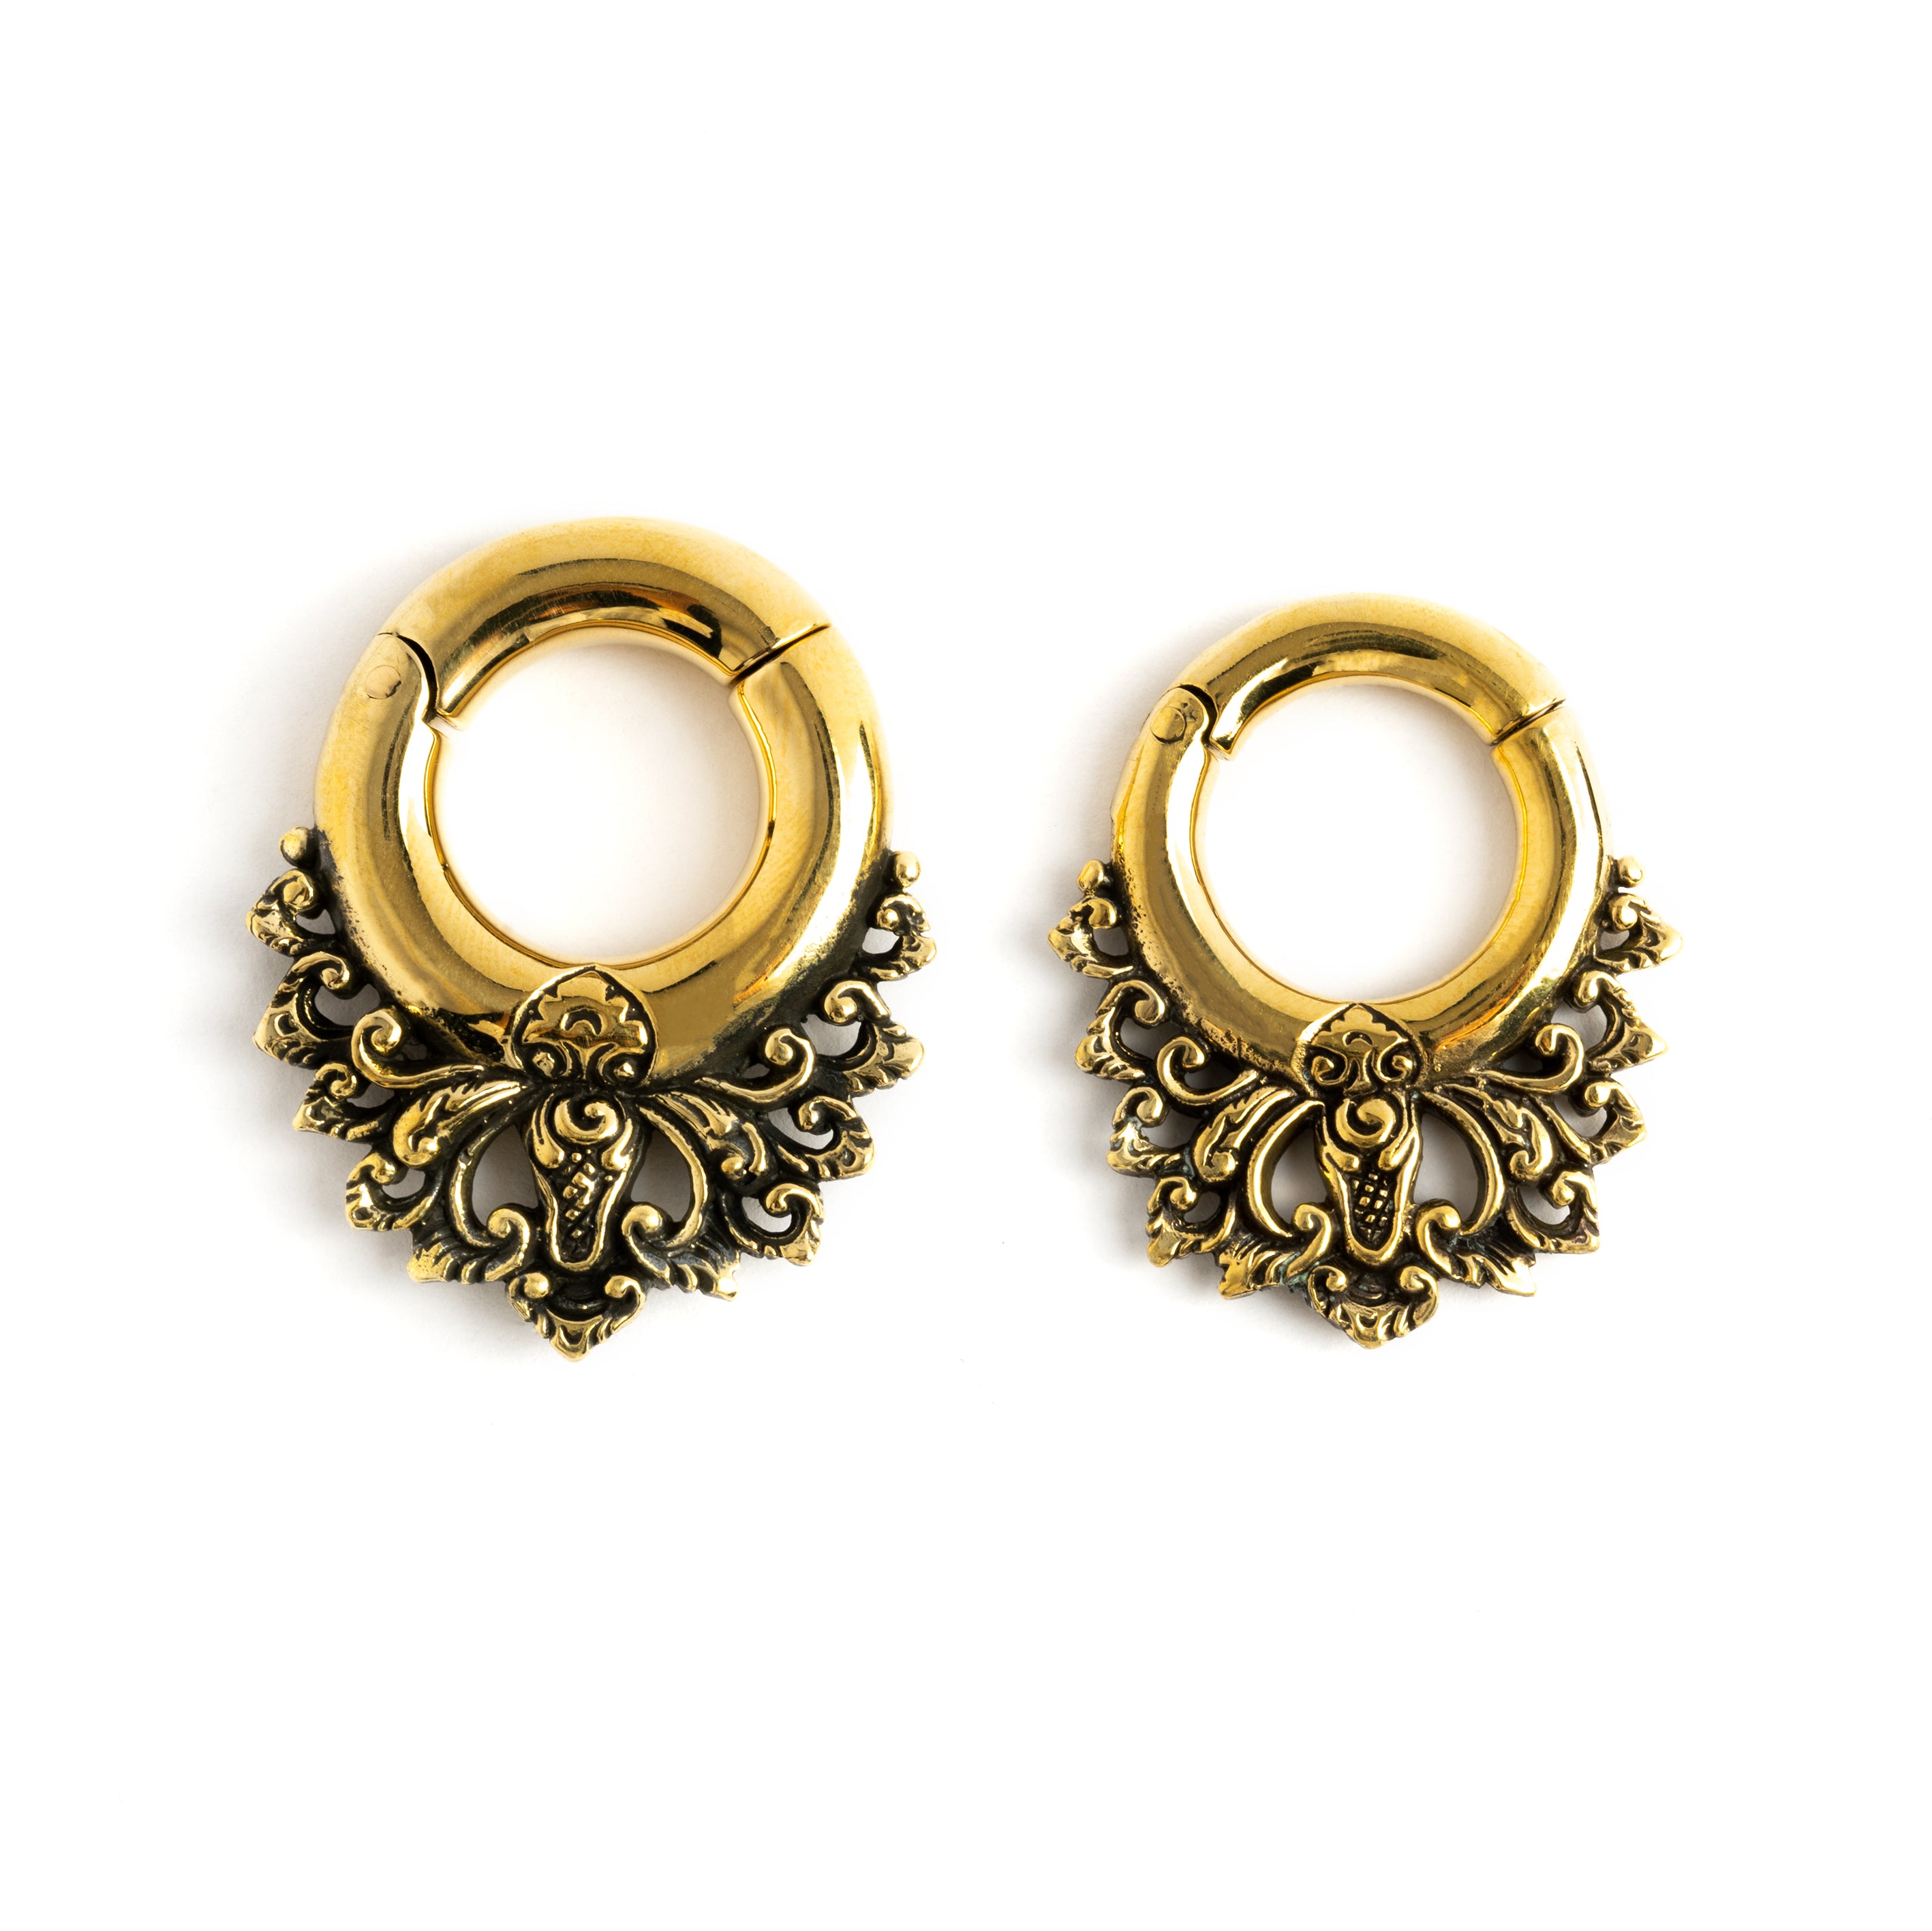 4mm and 6mm gold brass ear hangers hoops with floral victorian design frontal view